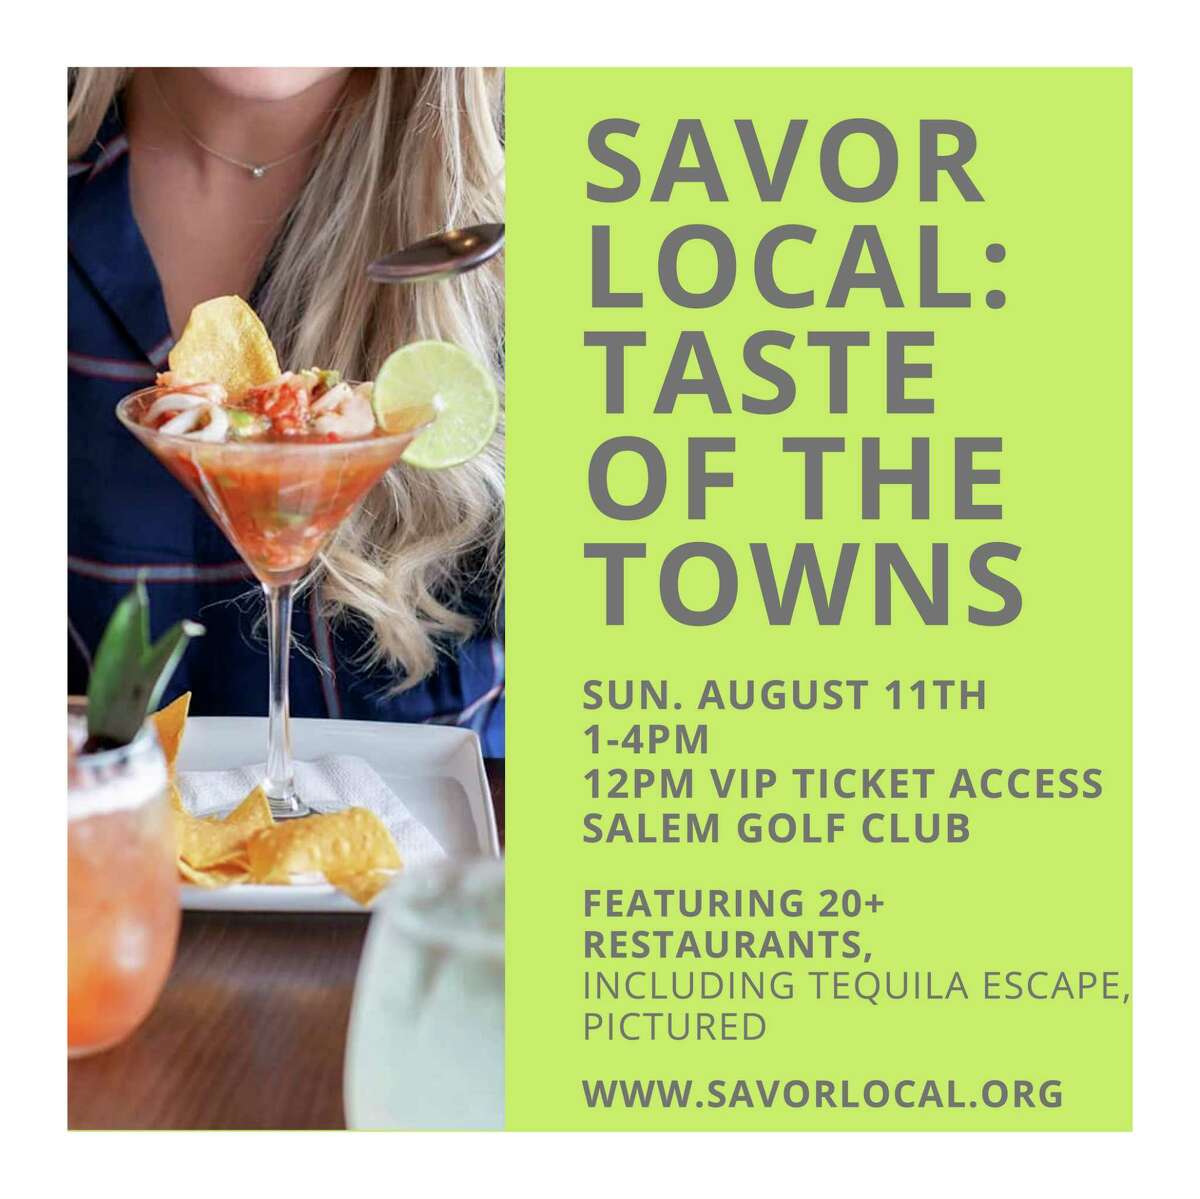 "Savor Local: Taste of the Towns" will feature local restaurants and distillers Sunday, Aug. 11, from 1-4 p.m. at Salem Golf Club